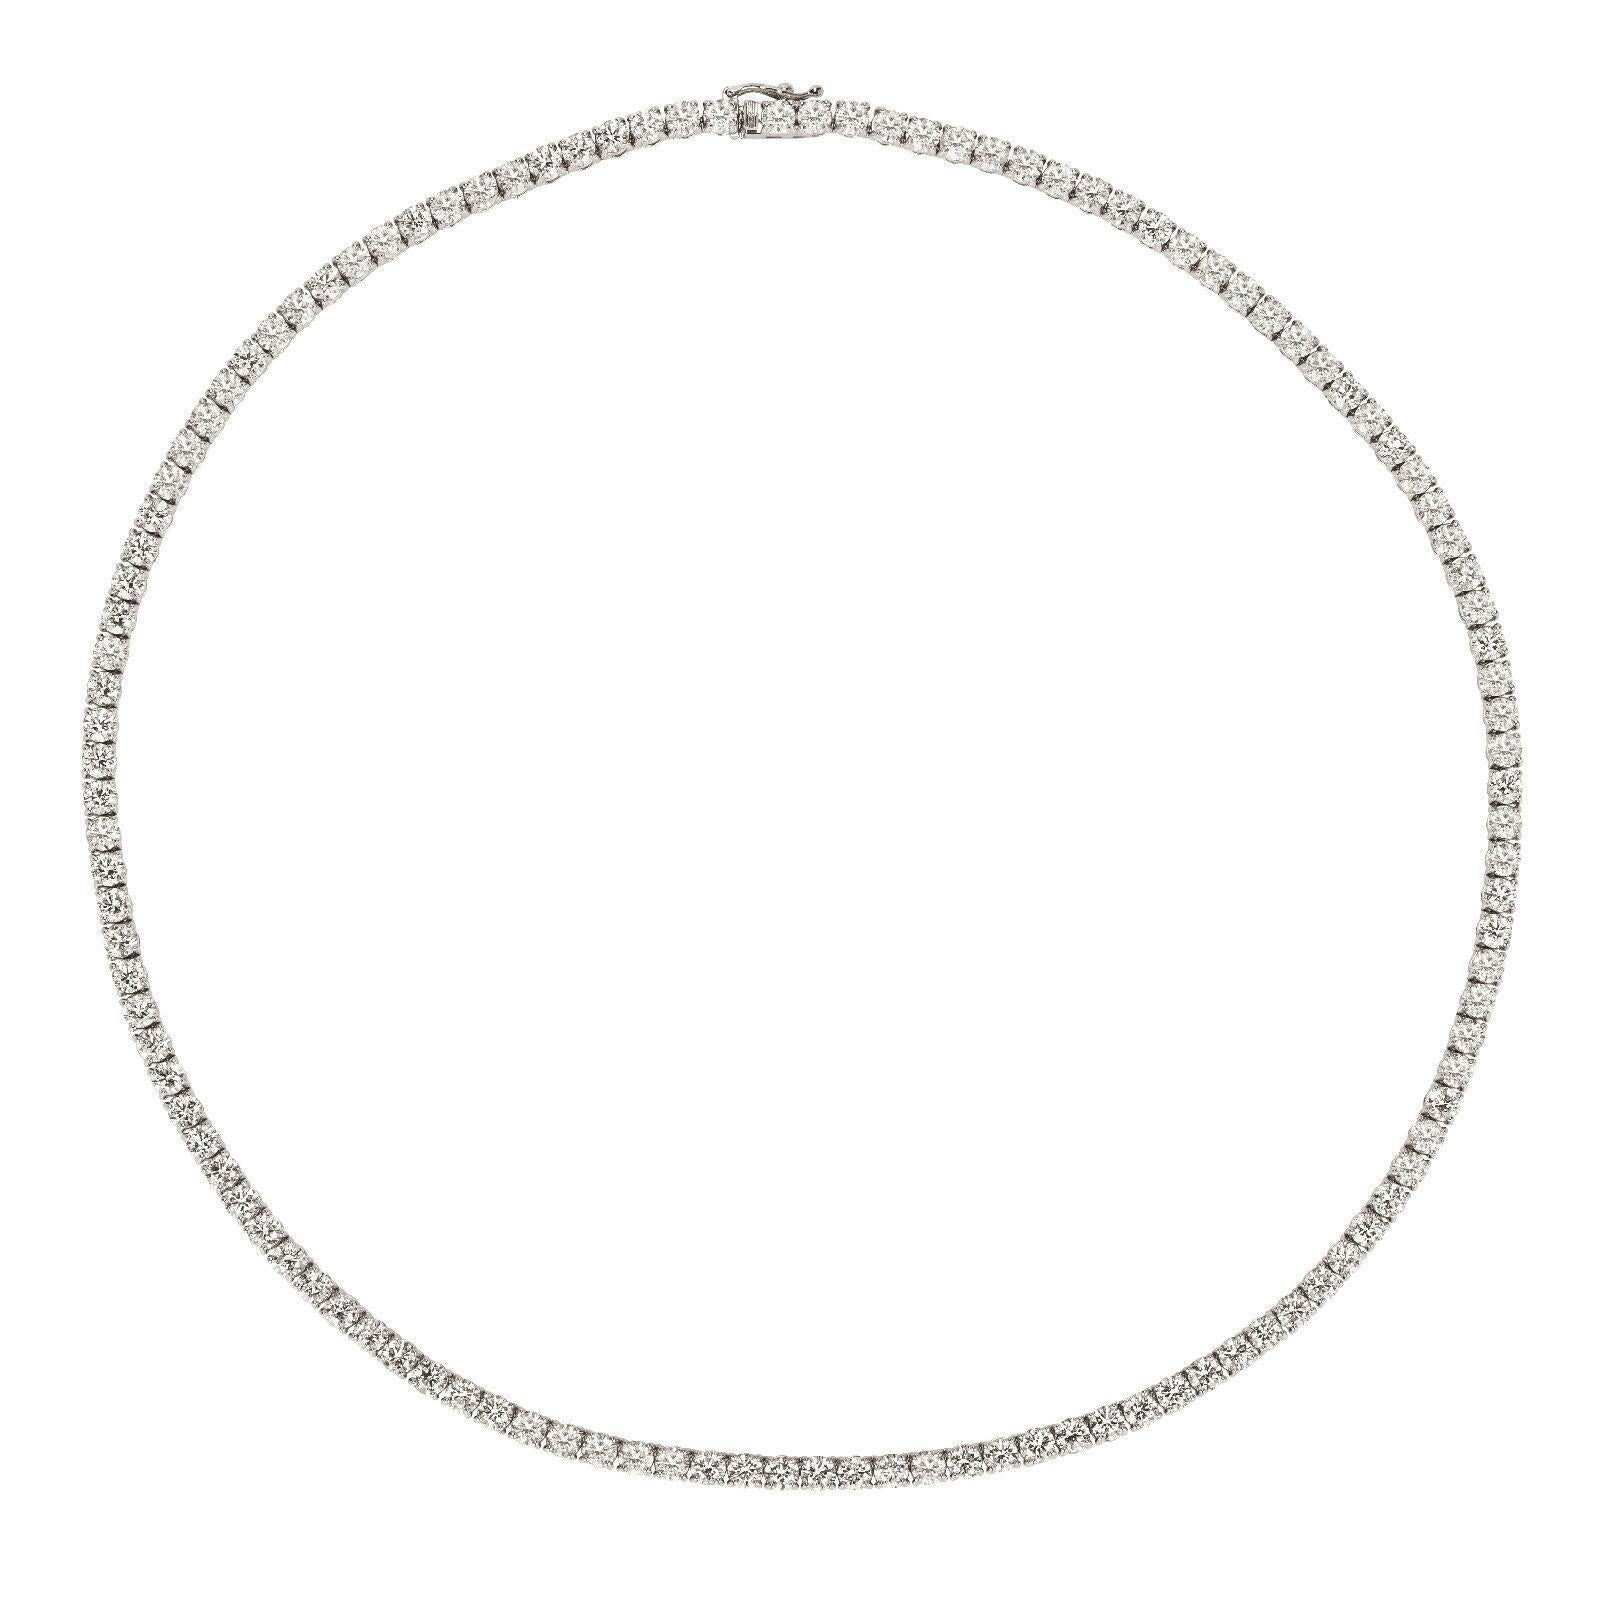 15.00 Carat Diamond Tennis Necklace G SI 14K White Gold 16 inches

100% Natural Diamonds, Not Enhanced in any way Round Cut Diamond  Necklace  
15.00CT
G-H 
SI  
14K White Gold, Pave style, 18.7 gram
16 inches in length, 1/8 inch in width
119